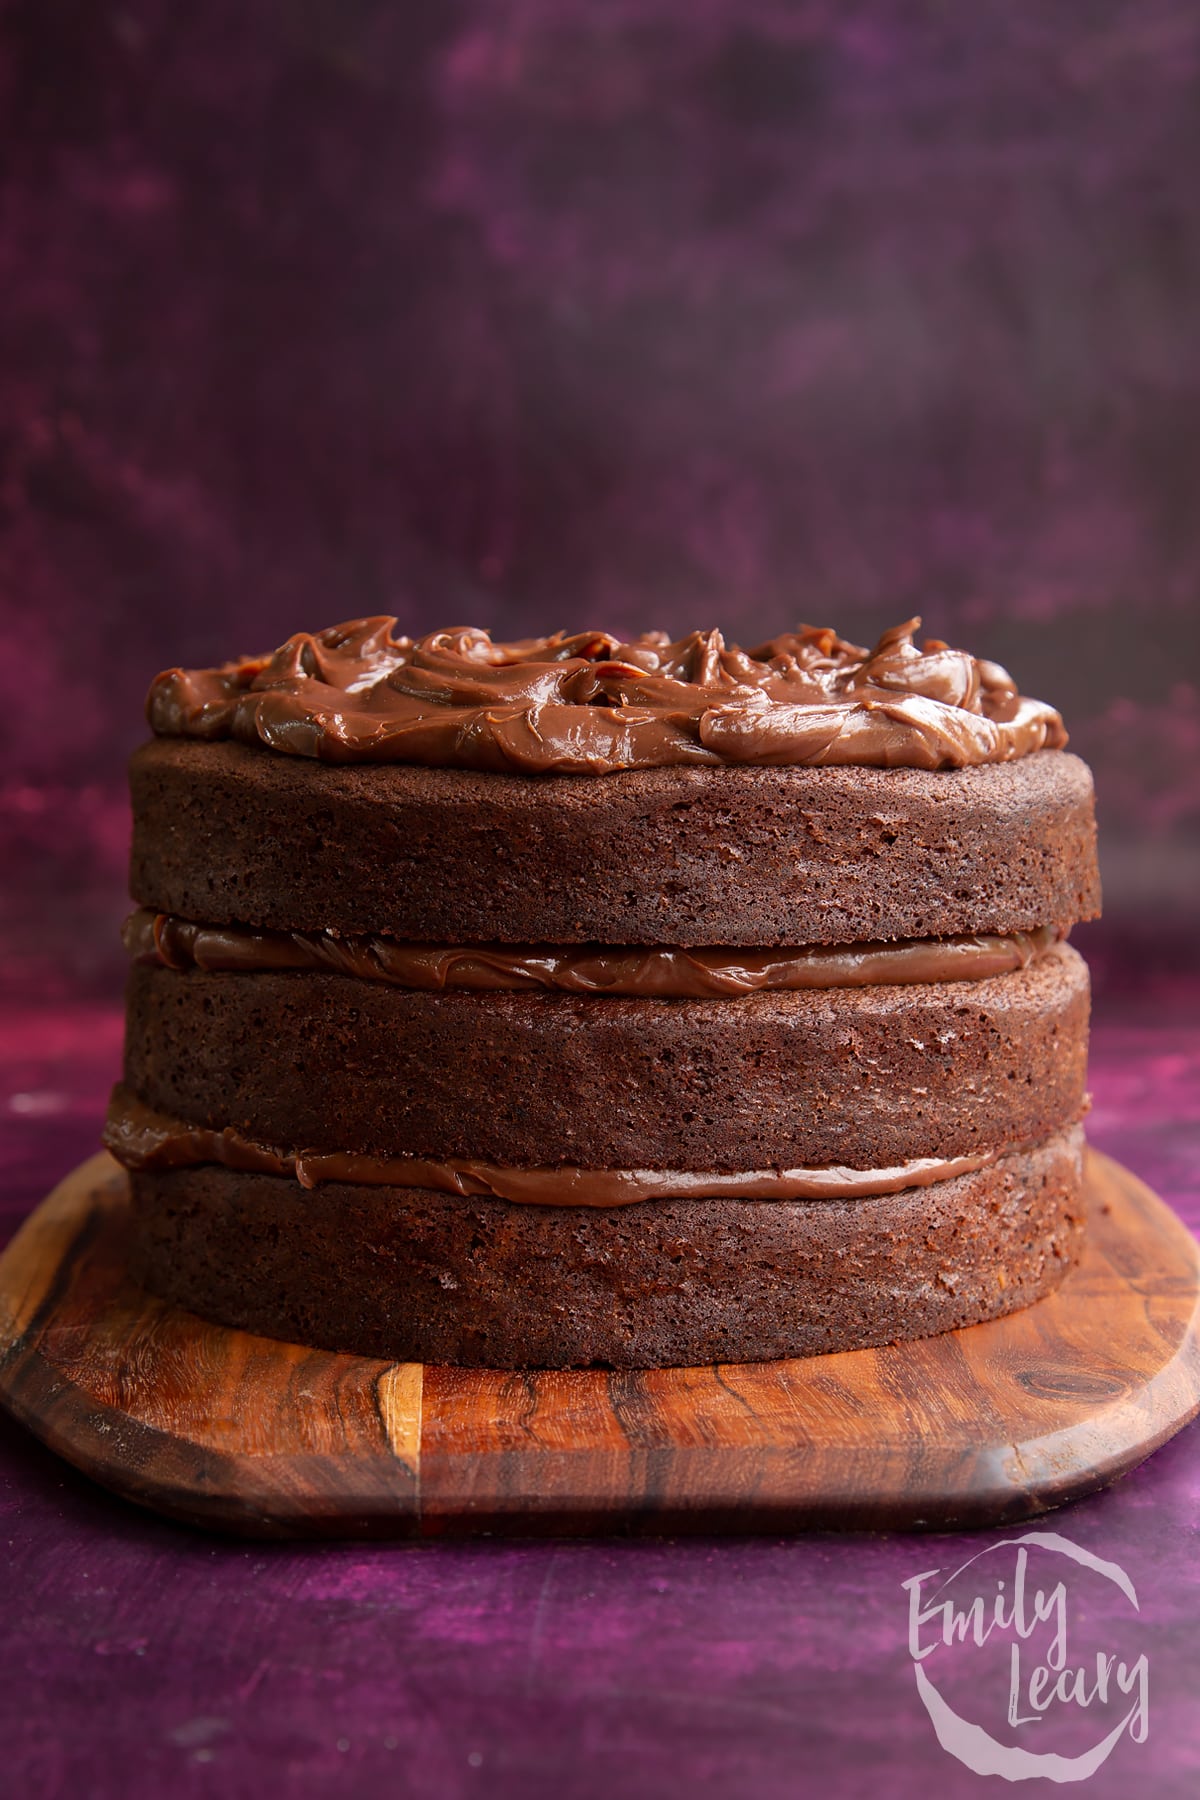 a side view of a 4 tier chocolate fudge cake on a wooden chopping board.